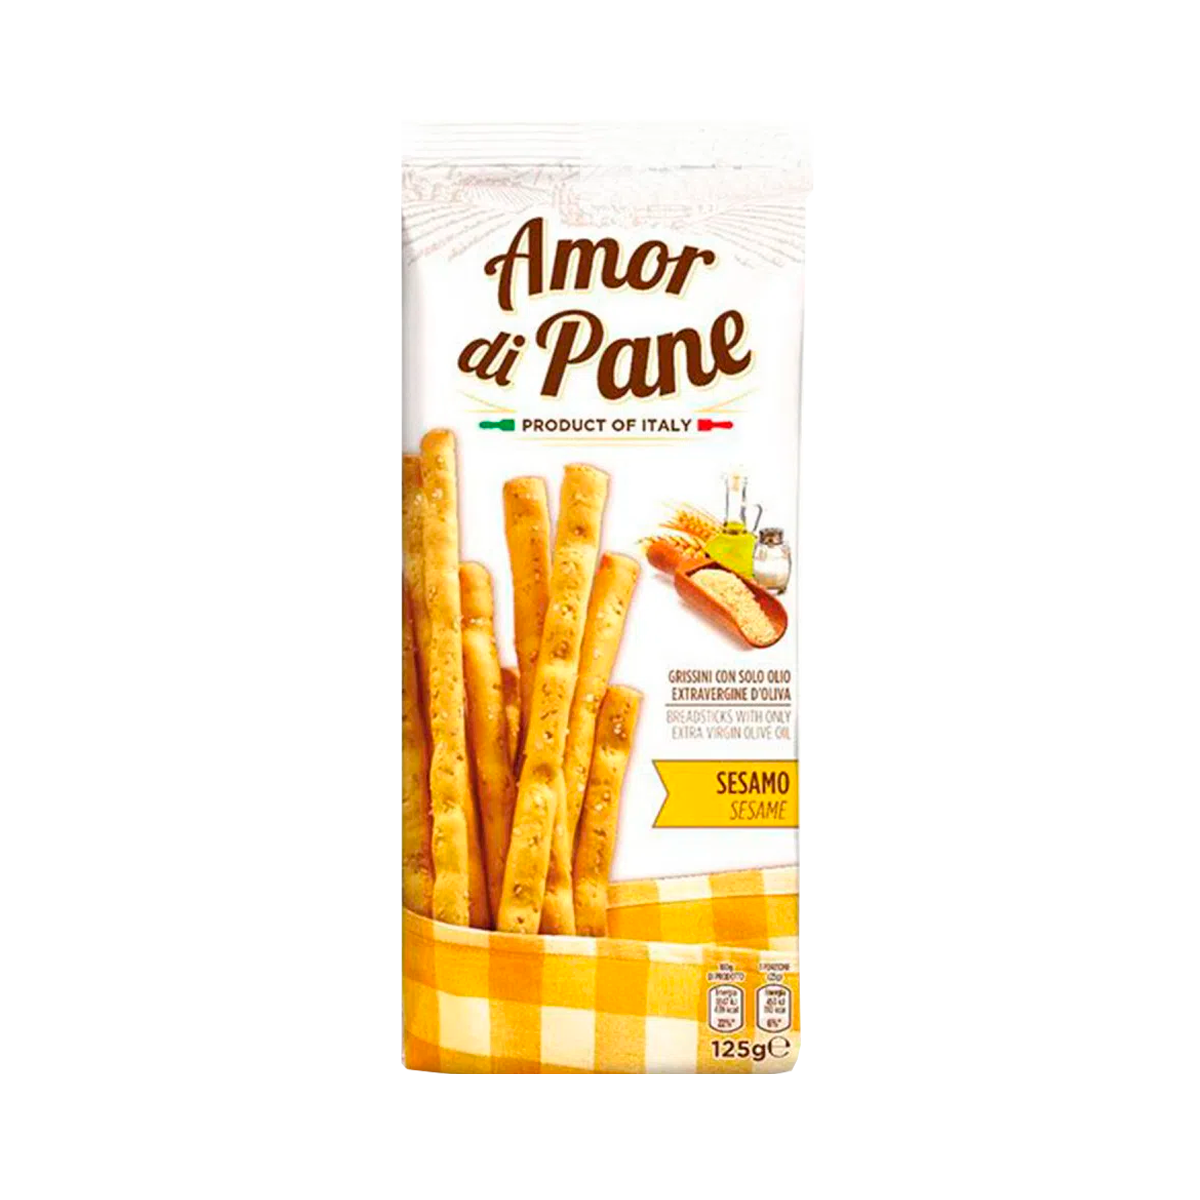 8005803010661 - AMOR DI PANE: ITALIAN BREADSTICKS, WITH ONLY EXTRA VIRGIN OLIVE OIL AND SESAME) * 4.4 OUNCE (125G) PACKAGES (PACK OF 4) *